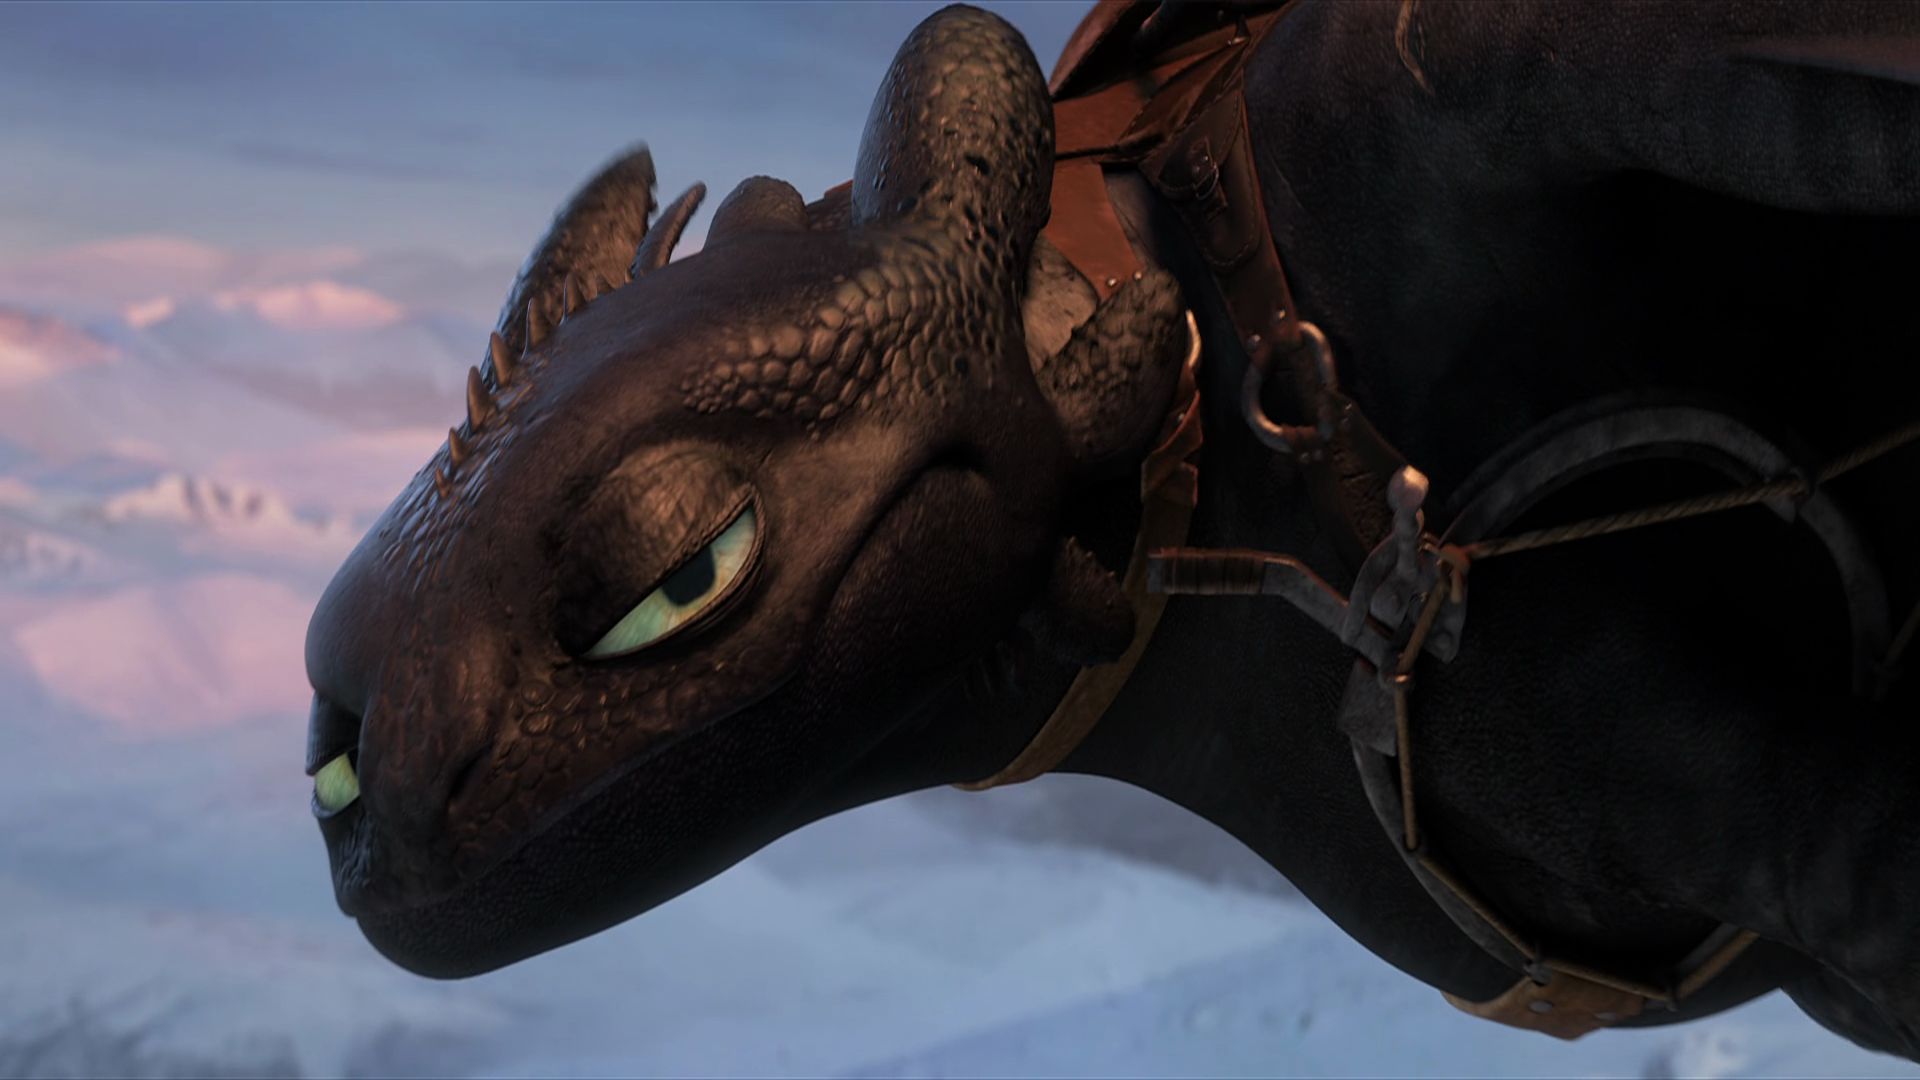 toothless (how to train your dragon), how to train your dragon, movie, how to train your dragon 2 images